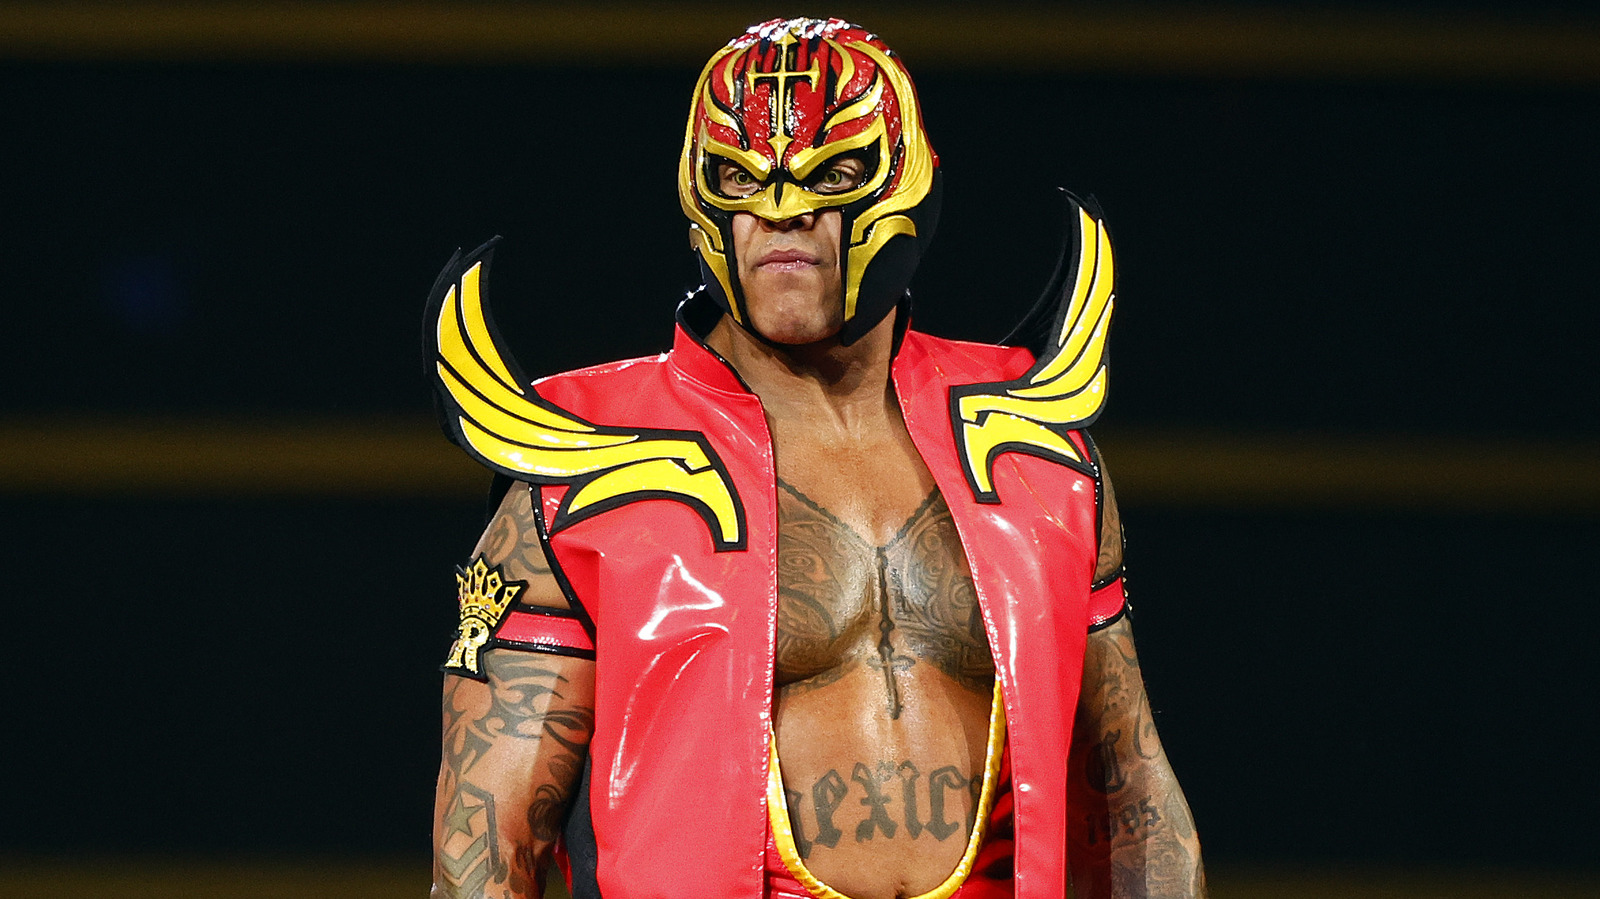 Details Of Rey Mysterio's Injury During Recent WWE SmackDown Match